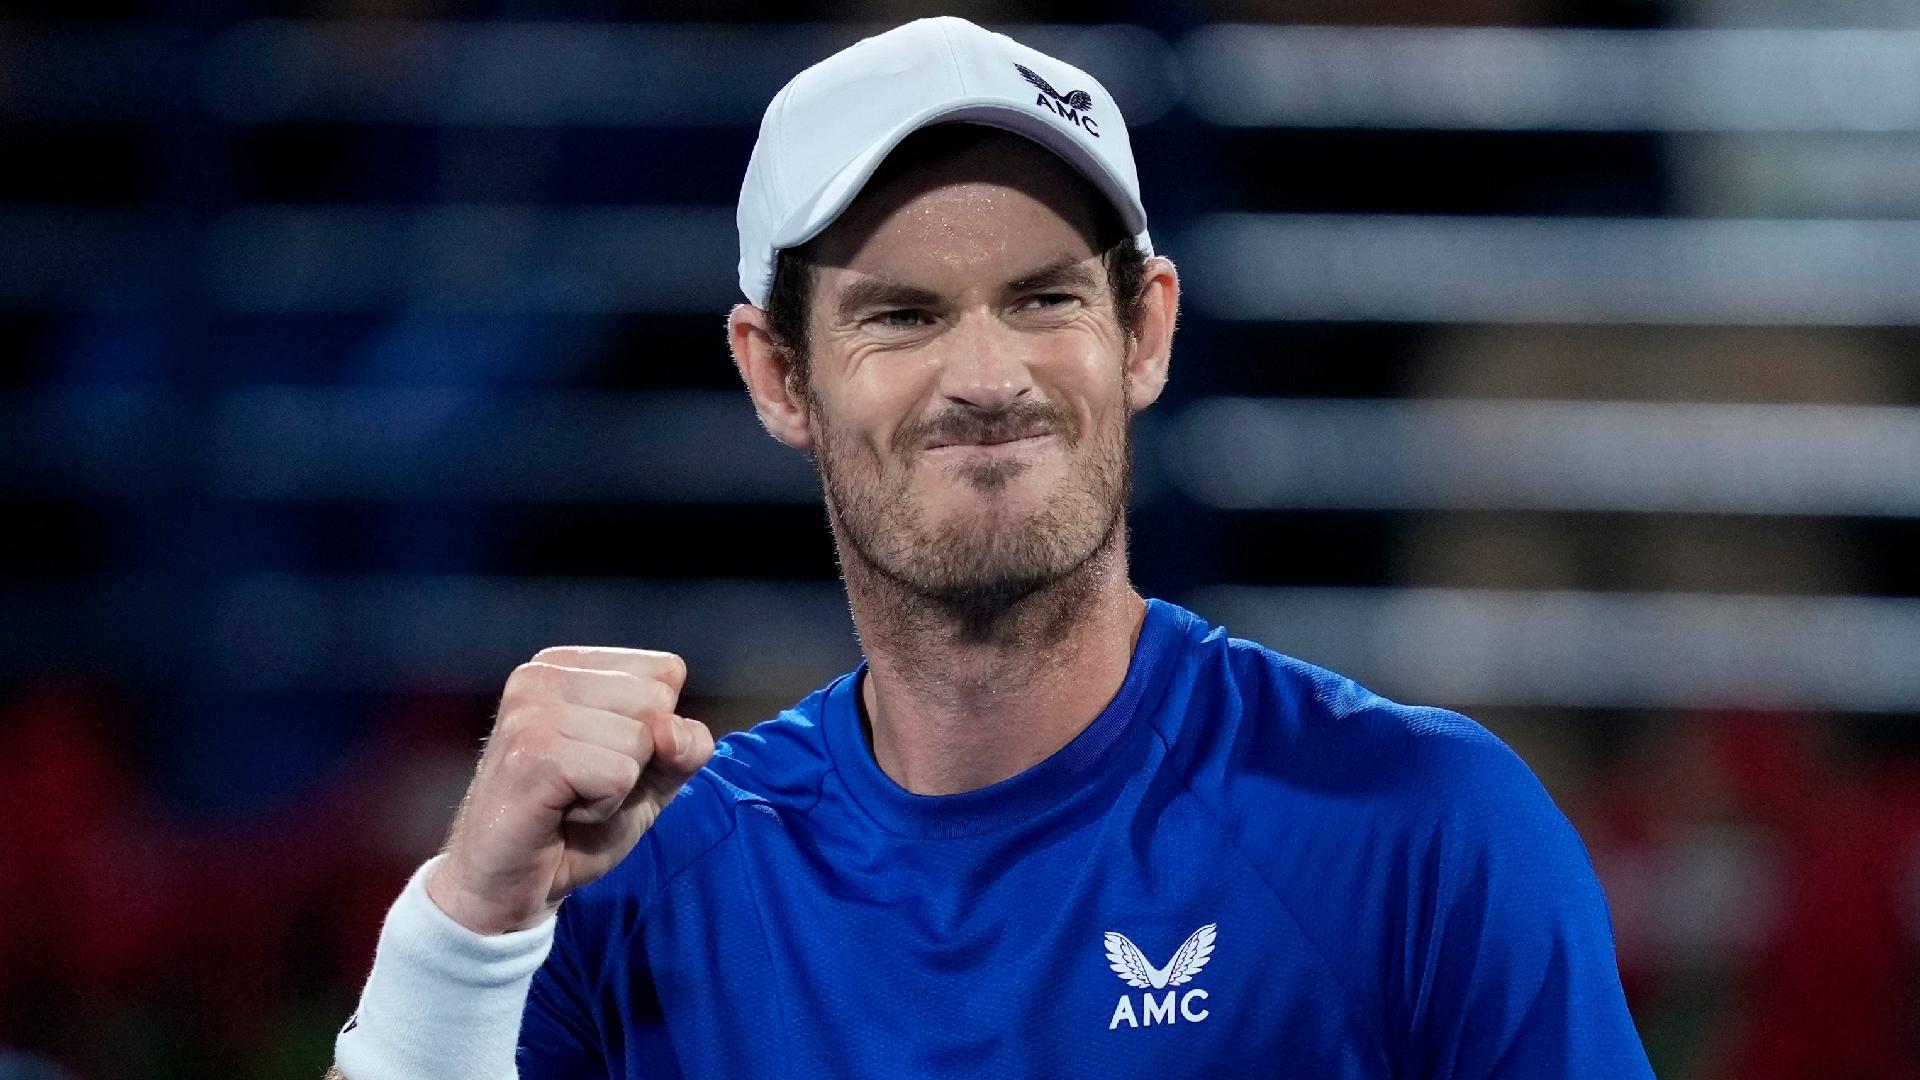 Andy Murray suggests he is in ‘last few months’ of career after Dubai win